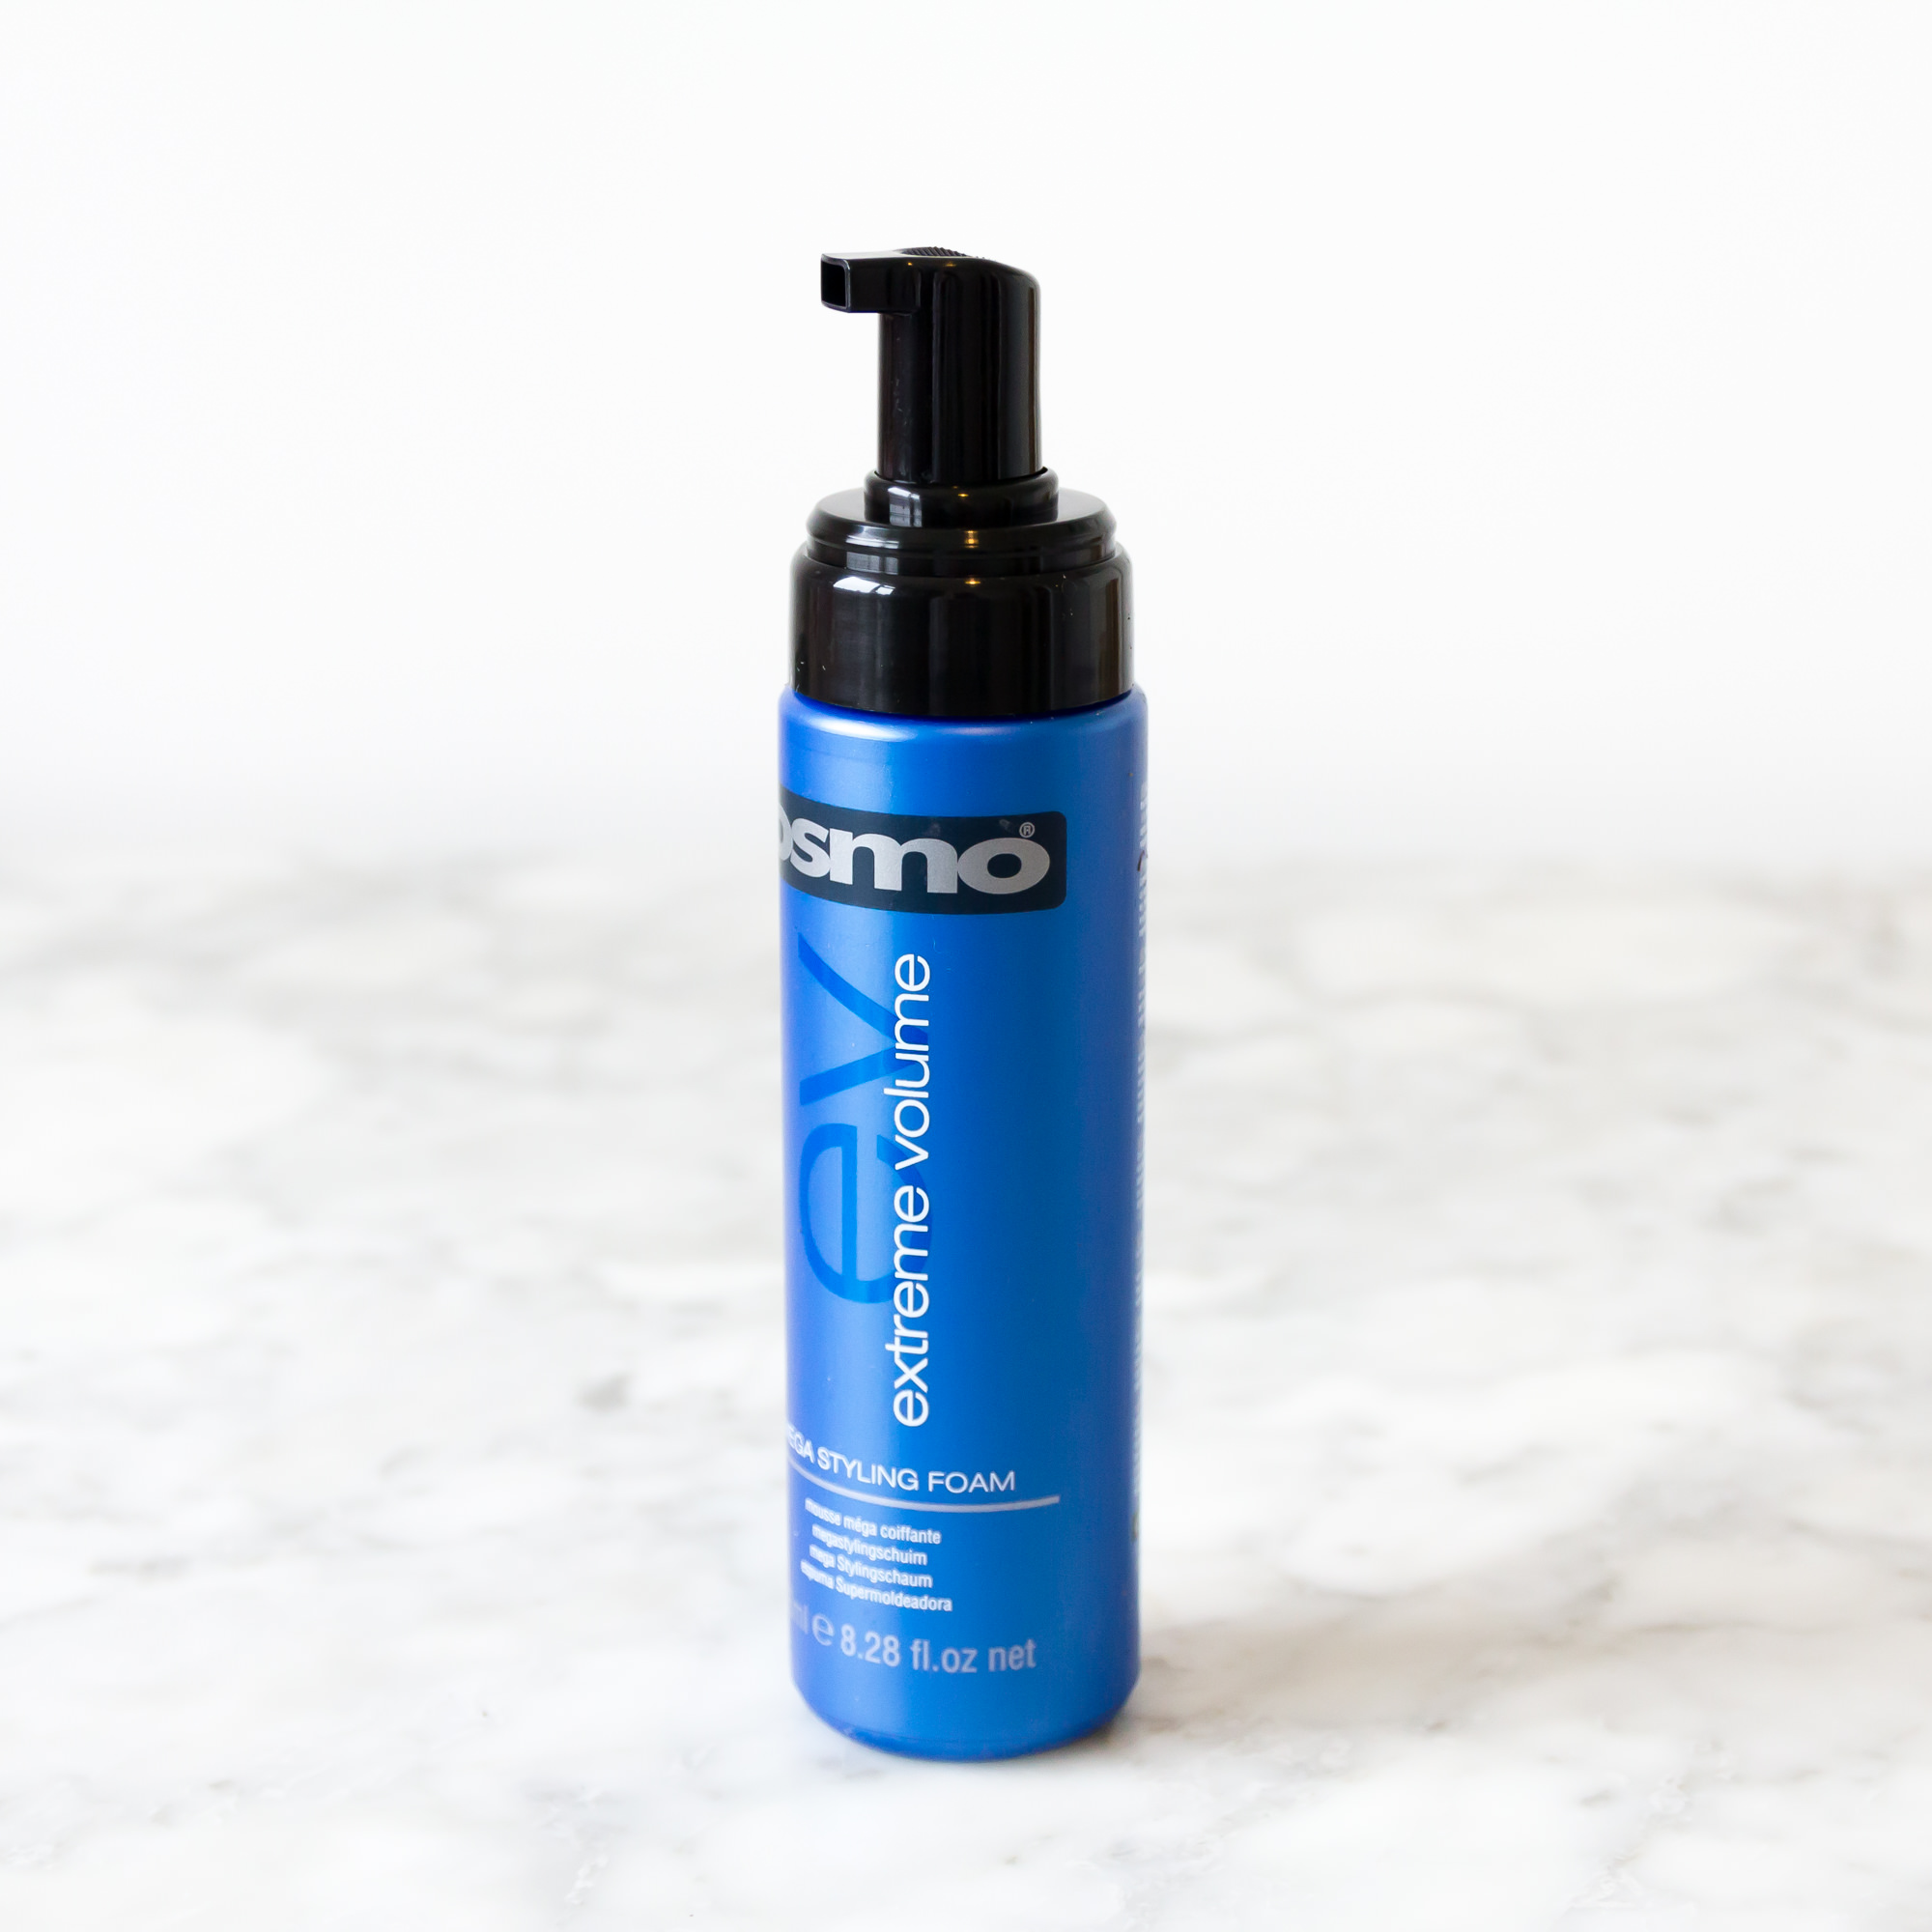 How to use hair mousse - Osmo Cosmetics